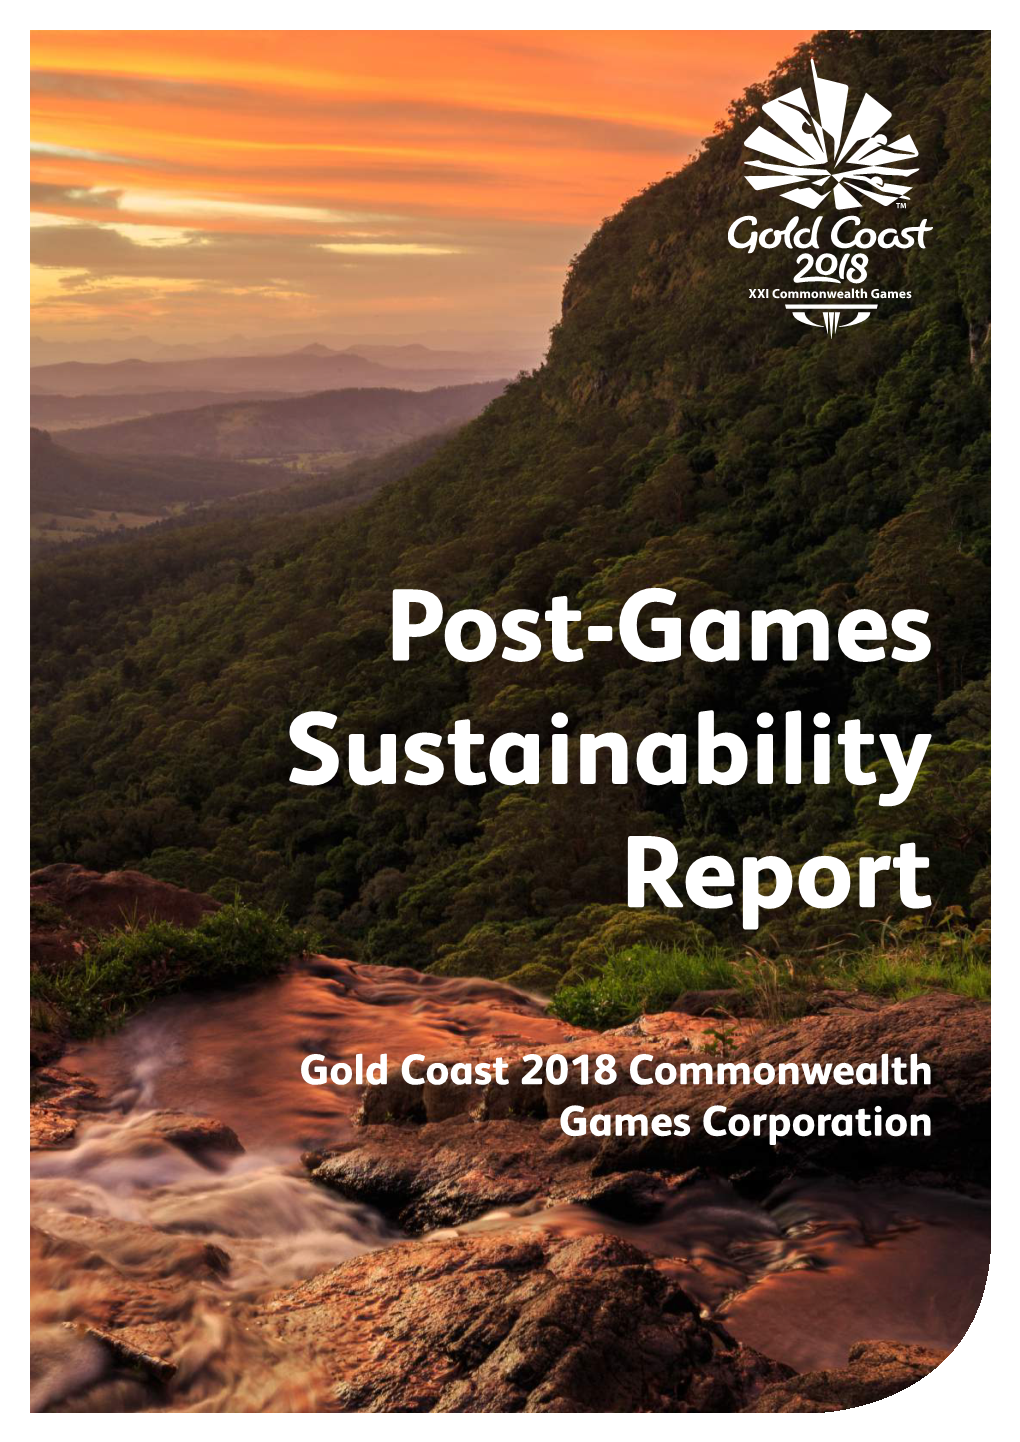 Post-Games Sustainability Report